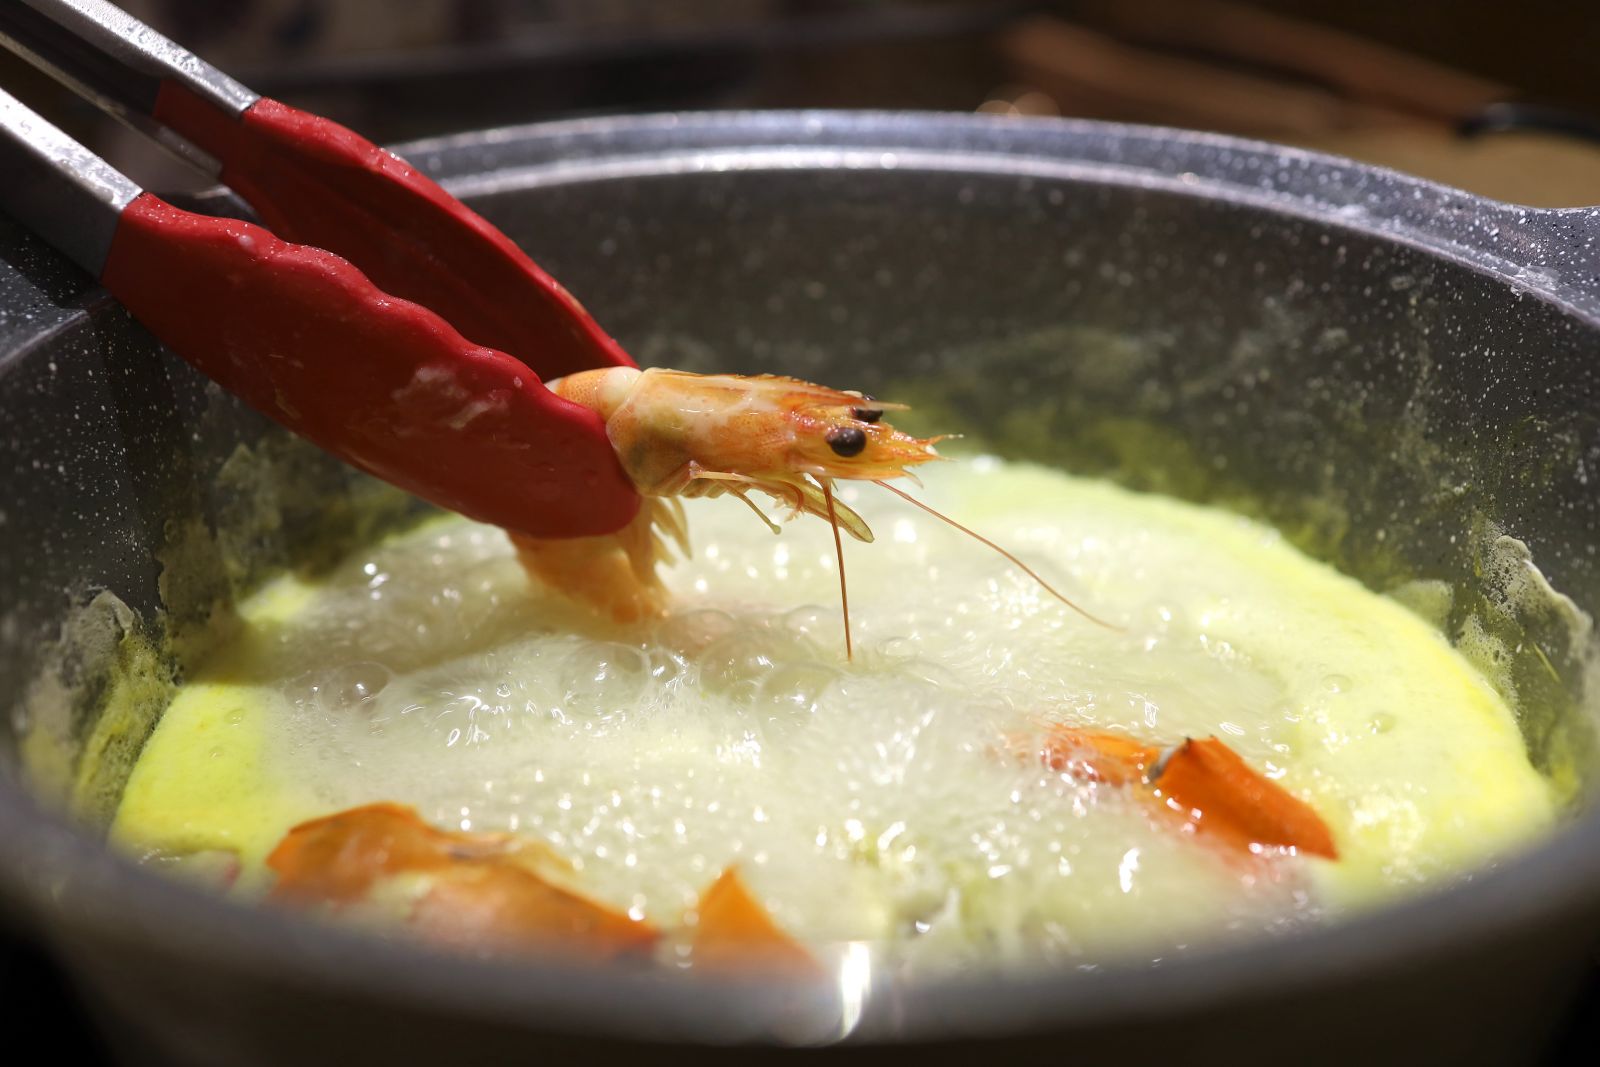 congee base hot pot mix with seafood